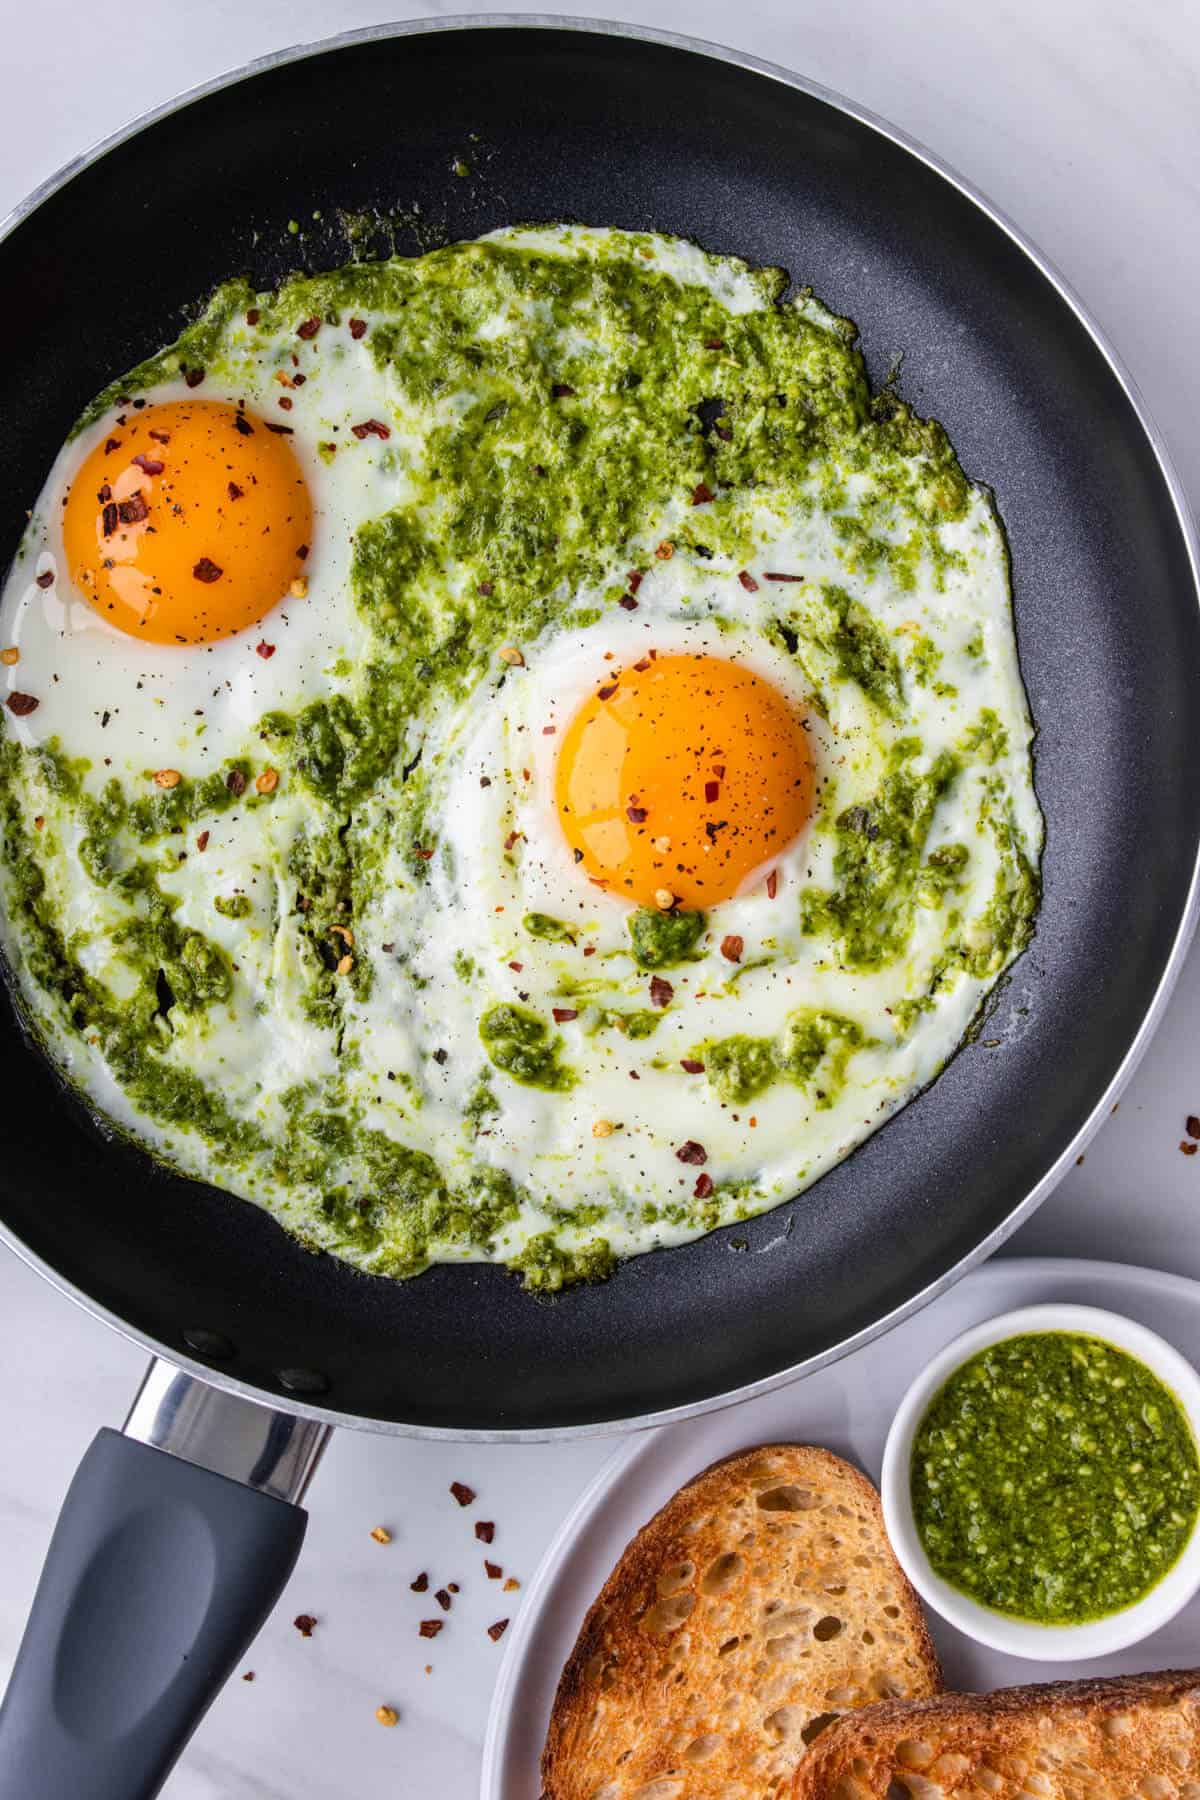 https://cookingwithayeh.com/wp-content/uploads/2021/05/Pesto-Eggs-1.jpg